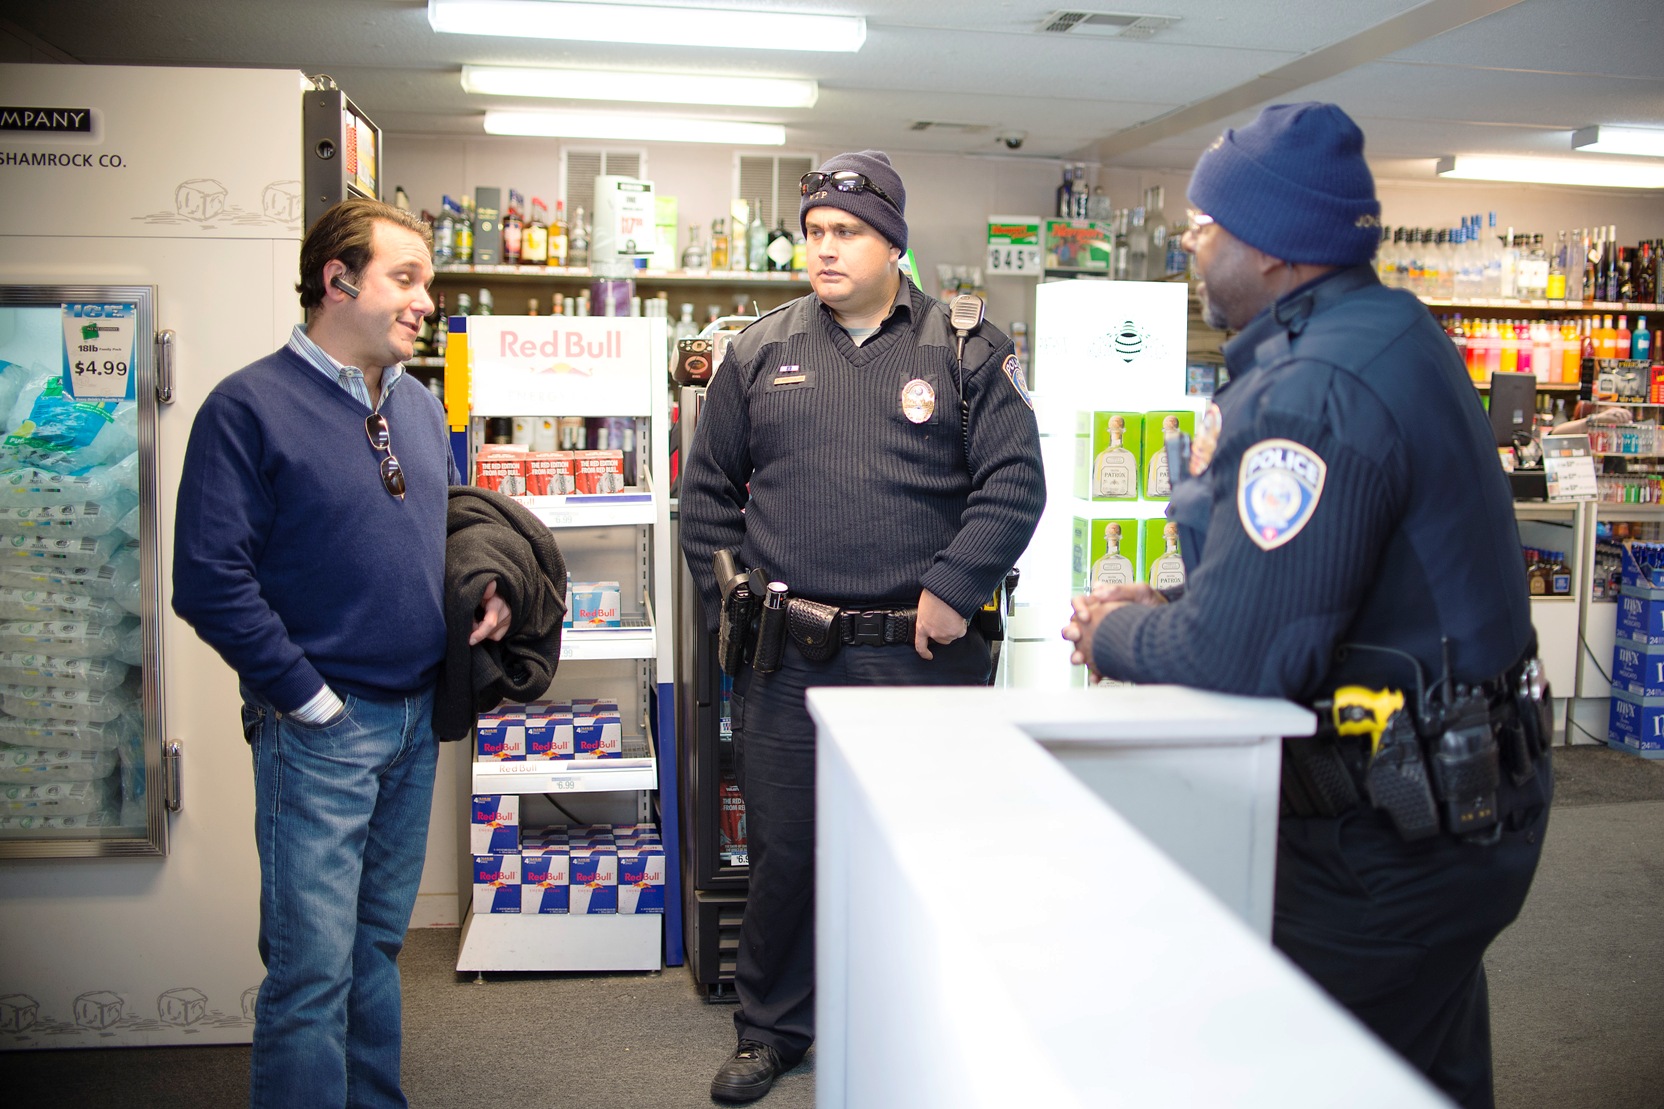 Metro Transit police officers David Hutchinson and Sidney Jones talk with Dean Rose, who owns Broadway Liqour Store at the corner of Broadway and Penn avenues.